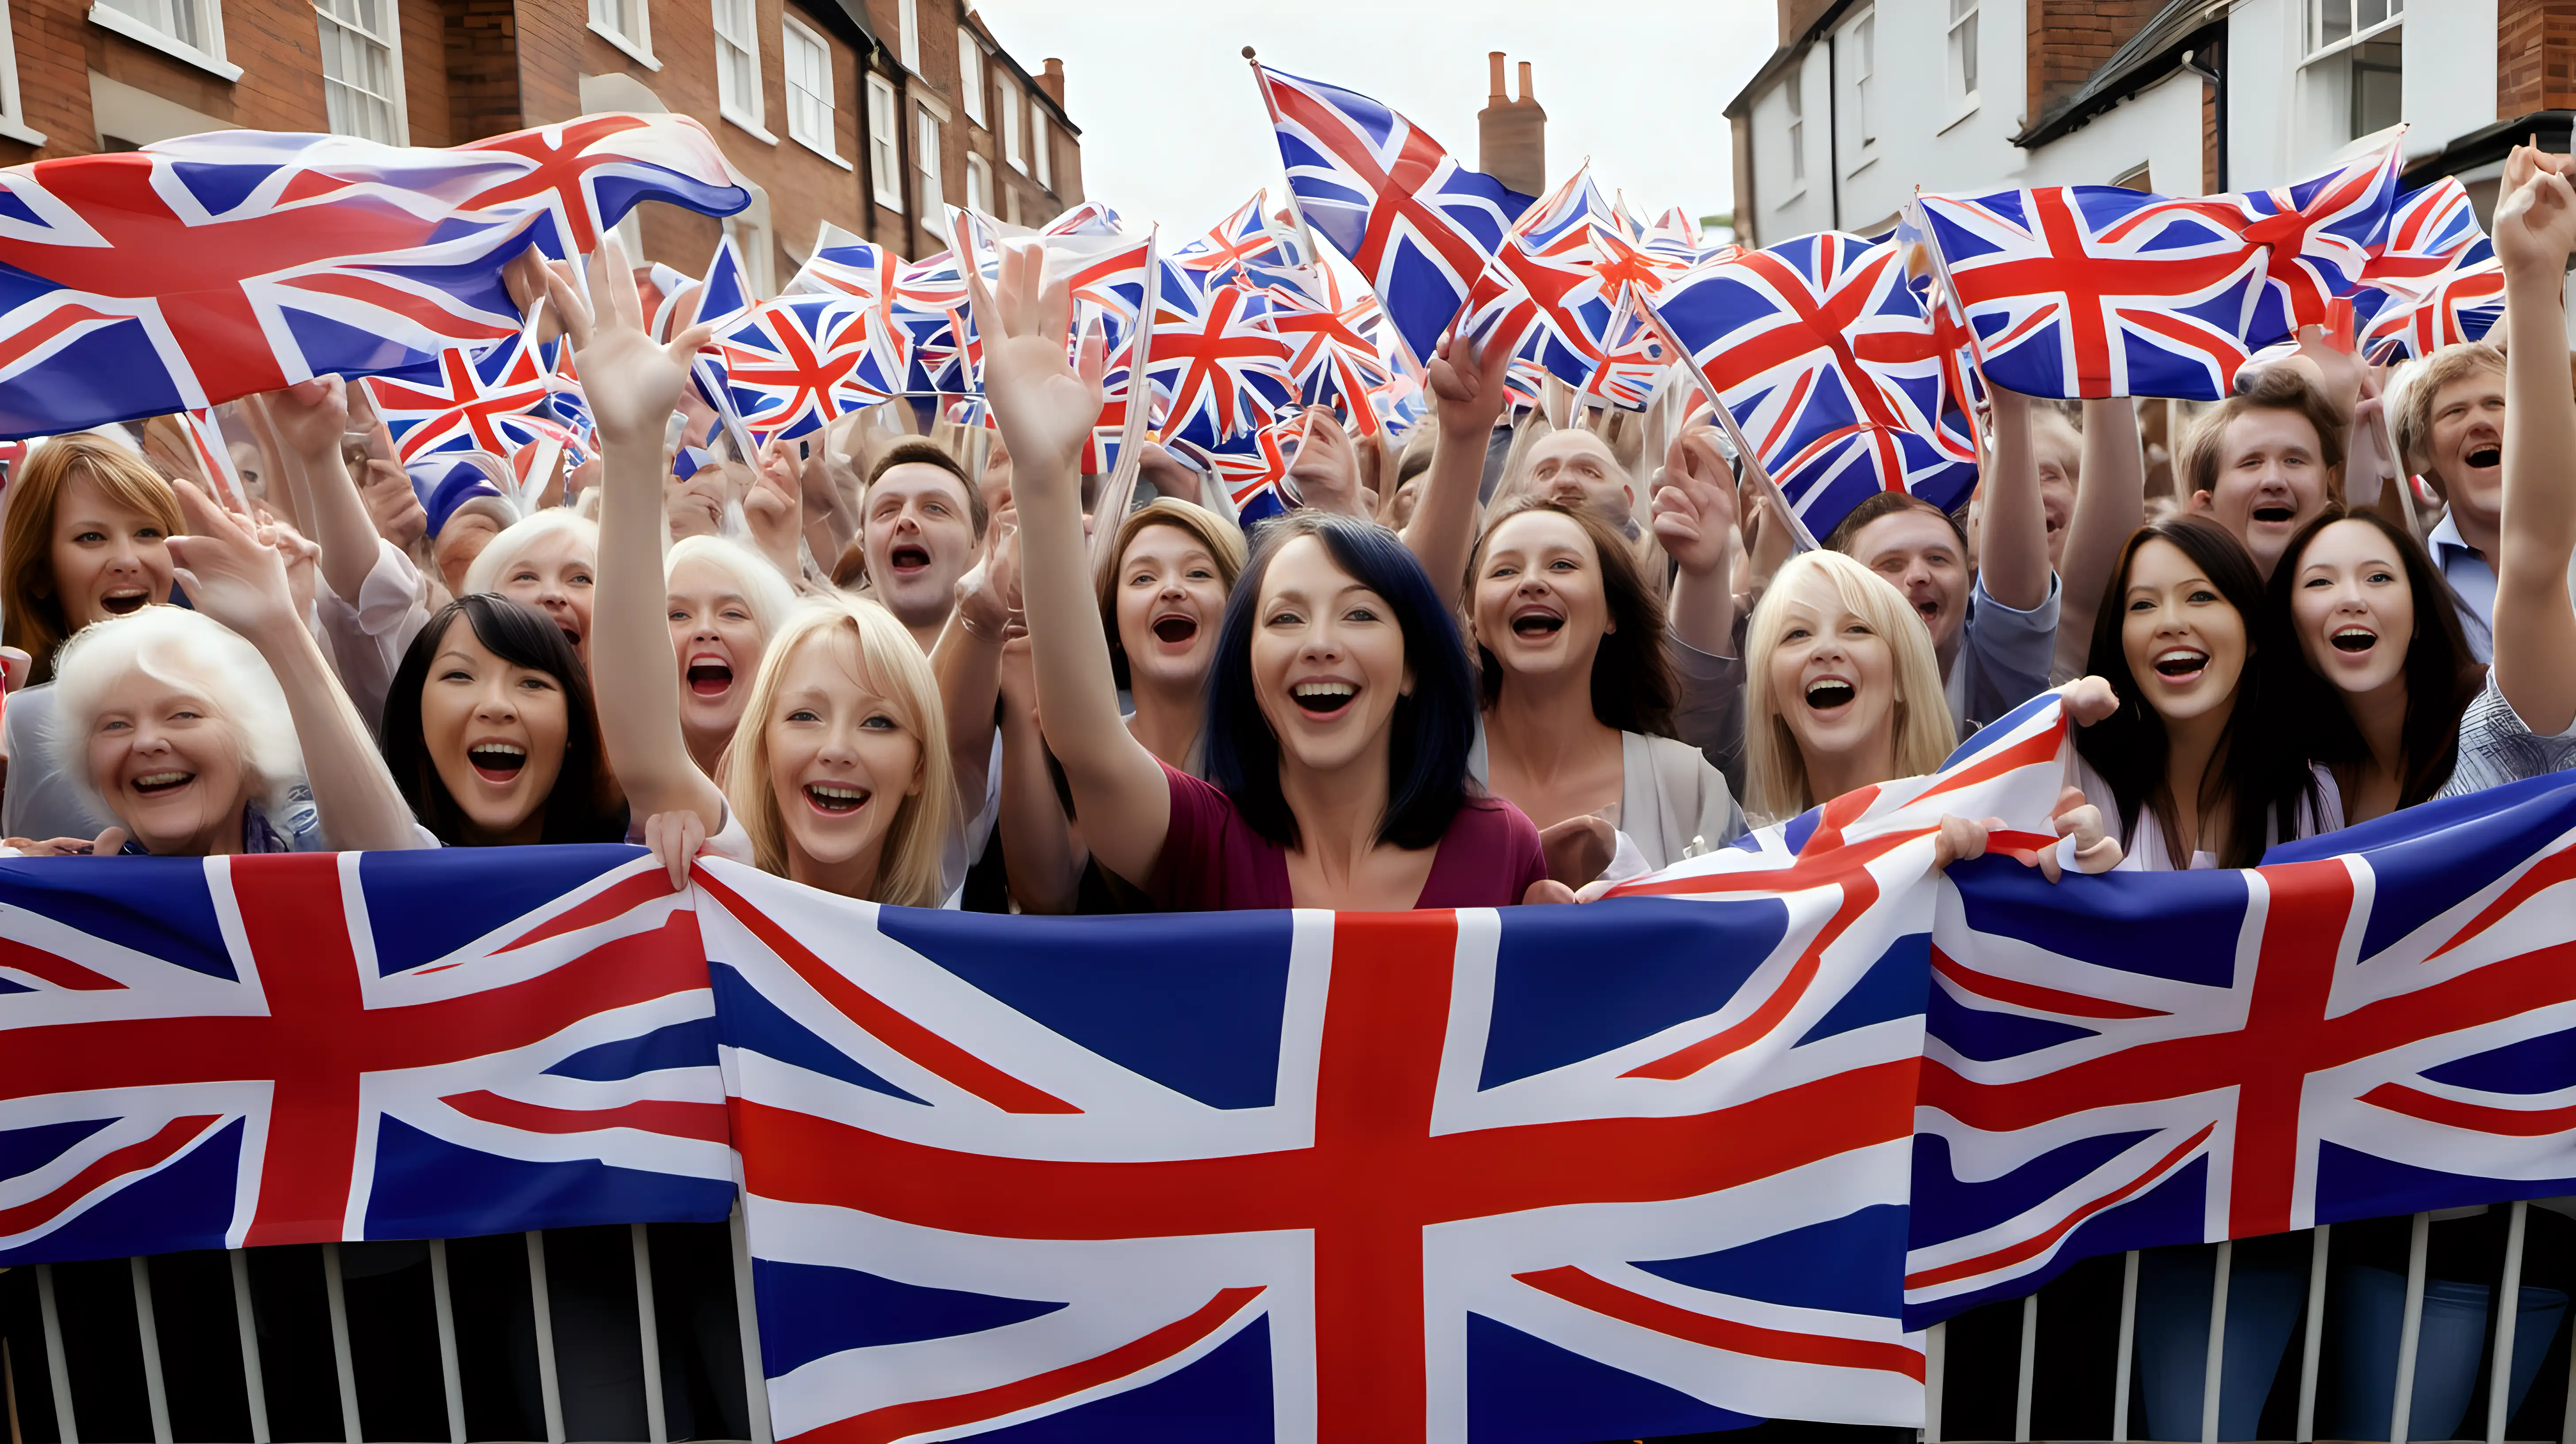 "Frame a scene of a group of people waving Union Jack flags in unison, their faces beaming with national pride during a celebratory event."